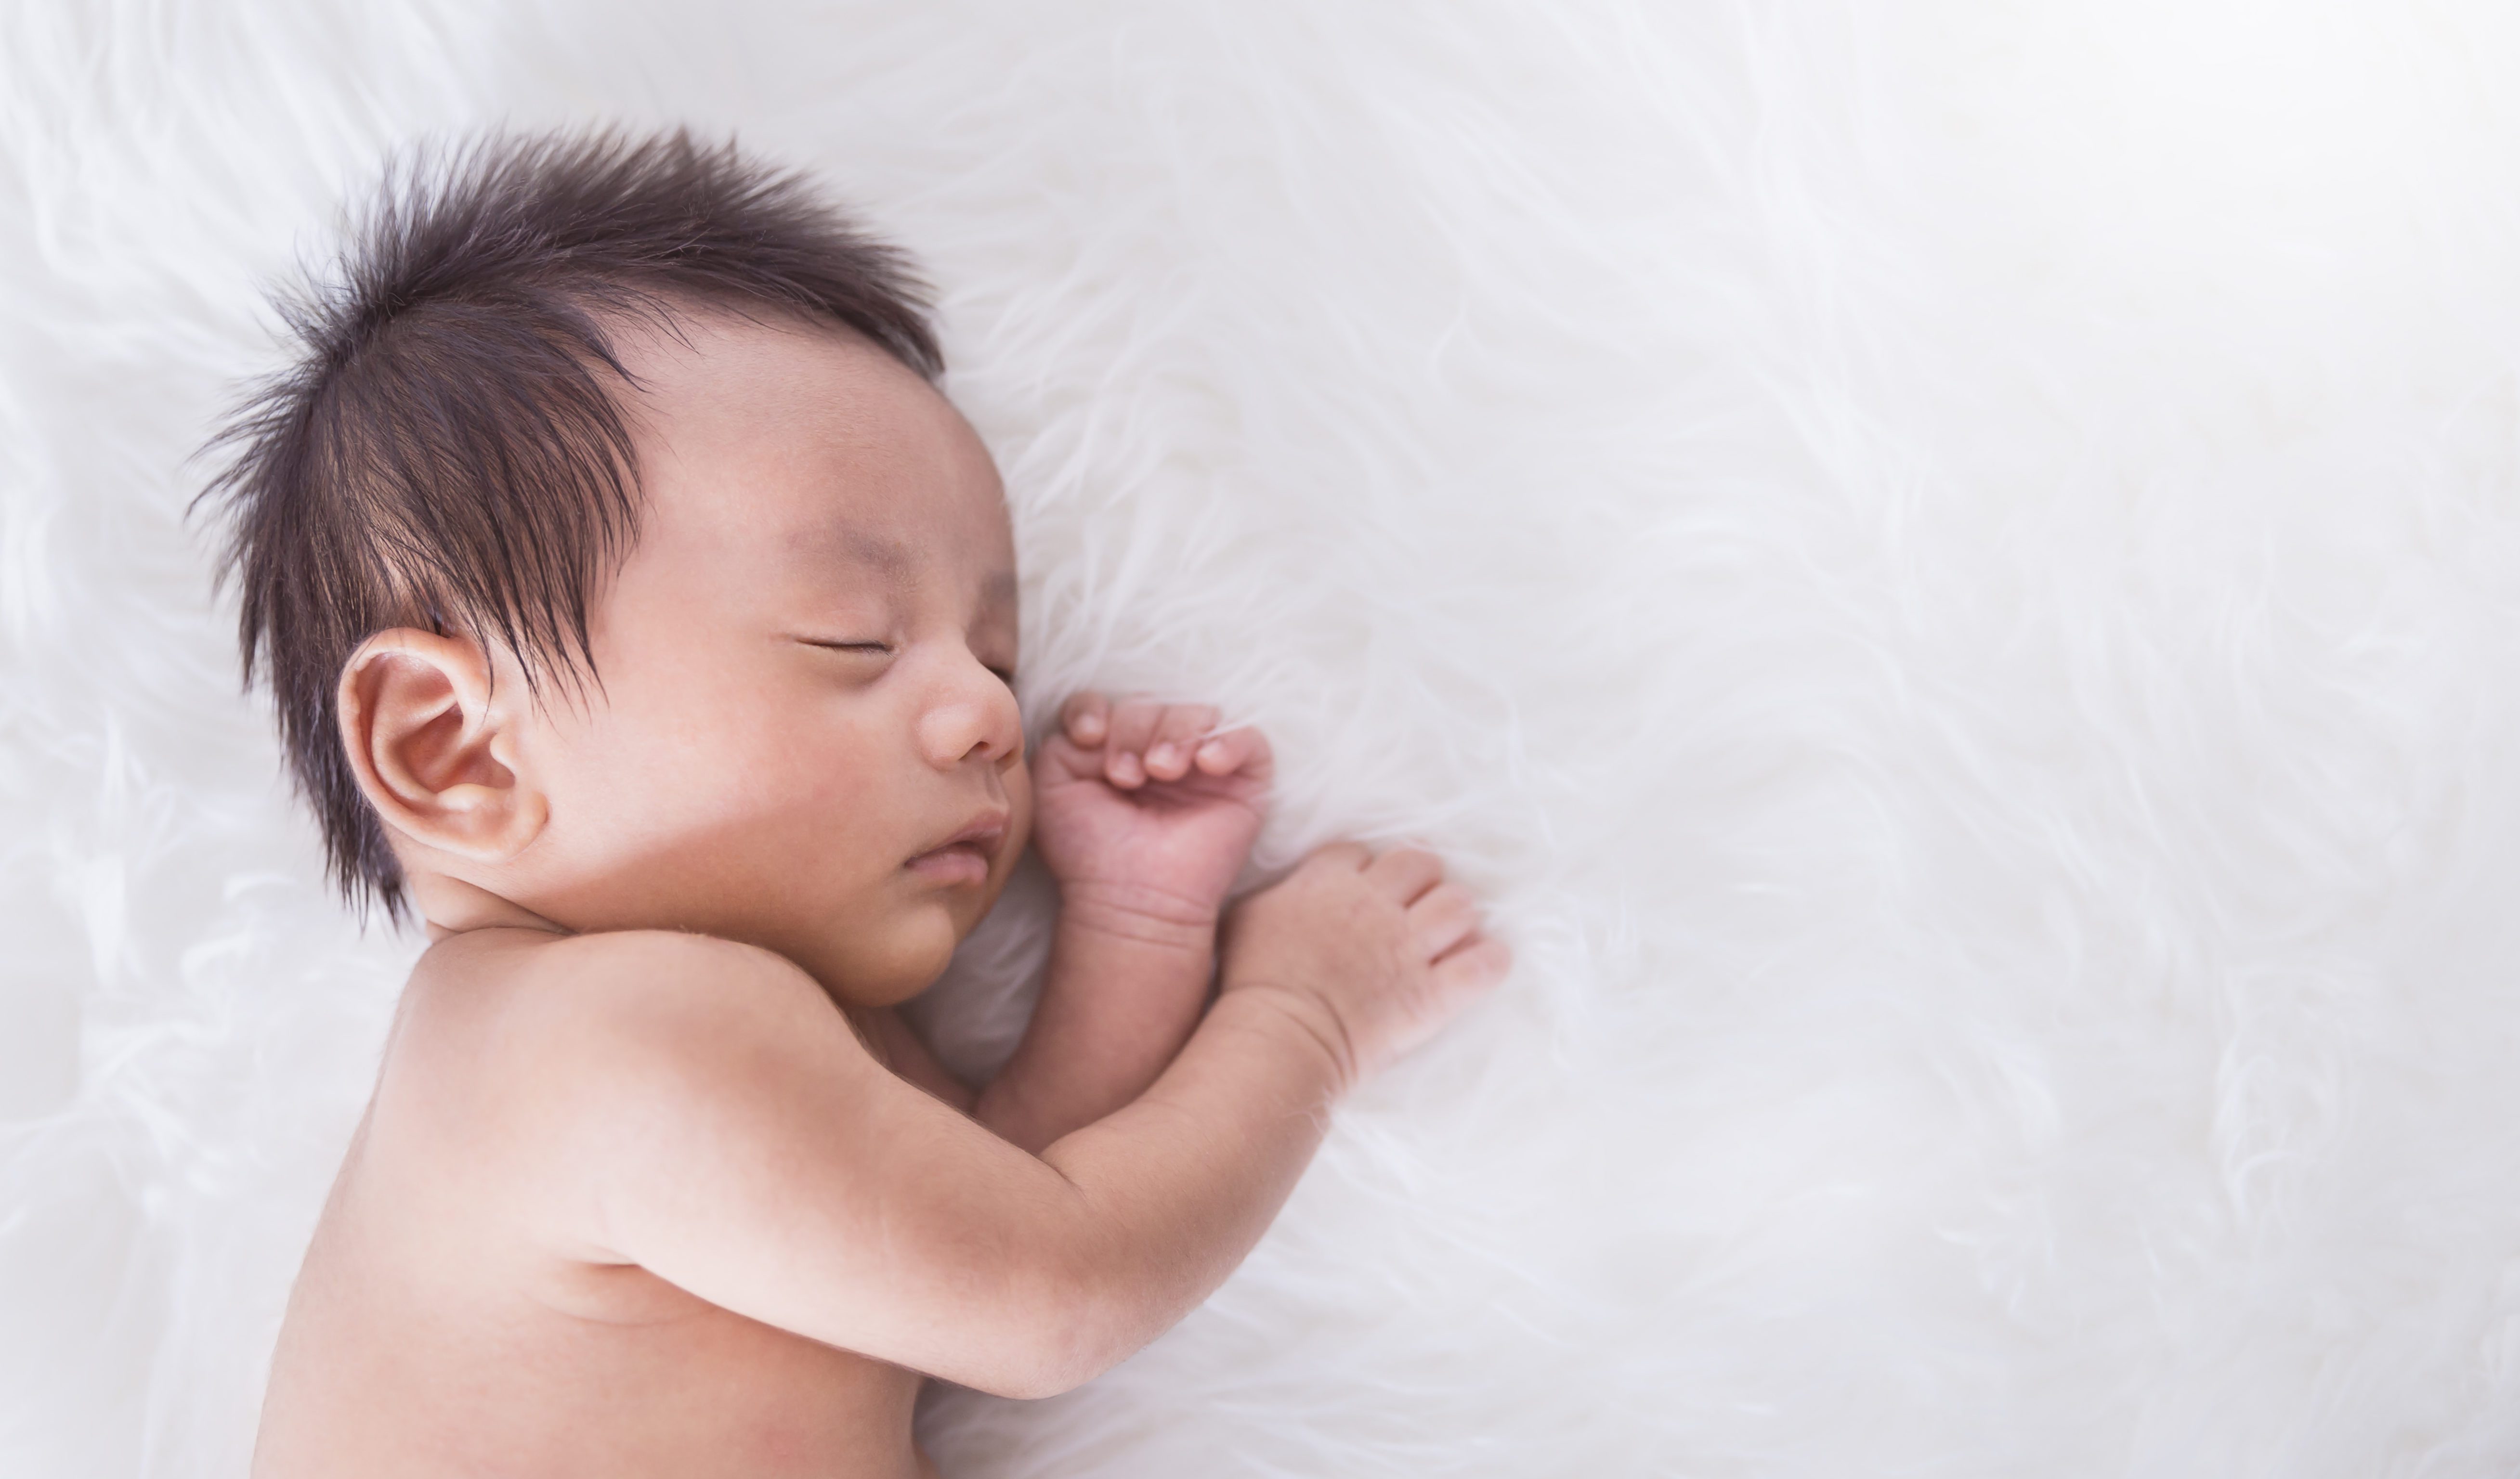 Banking your newborn's umbilical cord blood with Cord for Life could save a life.